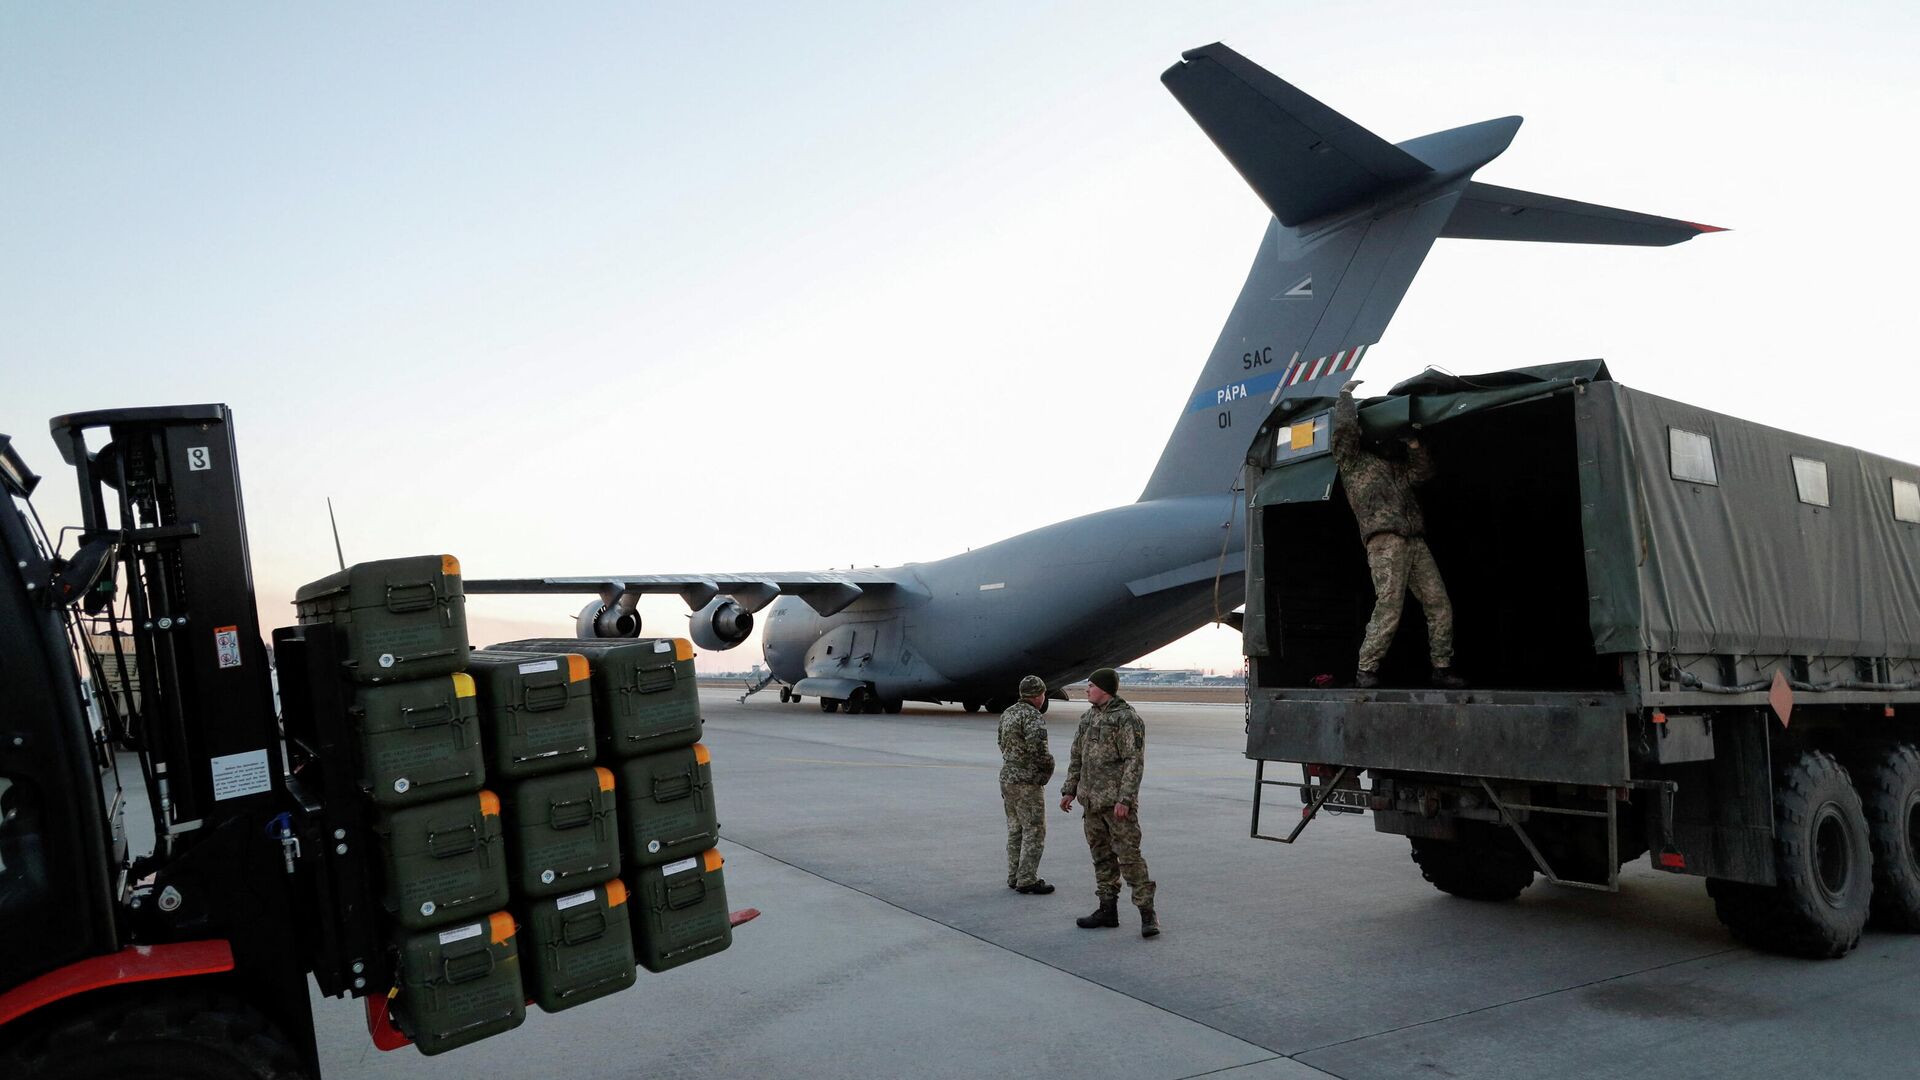 Lithuania's military aid including Stinger anti-aircraft missiles, delivered as part of the security support package for Ukraine, is unloaded from a ?17 Globemaster III plane at the Boryspil International Airport outside Kyiv, Ukraine, February 13, 2022. REUTERS/Valentyn Ogirenko - Sputnik International, 1920, 14.03.2022